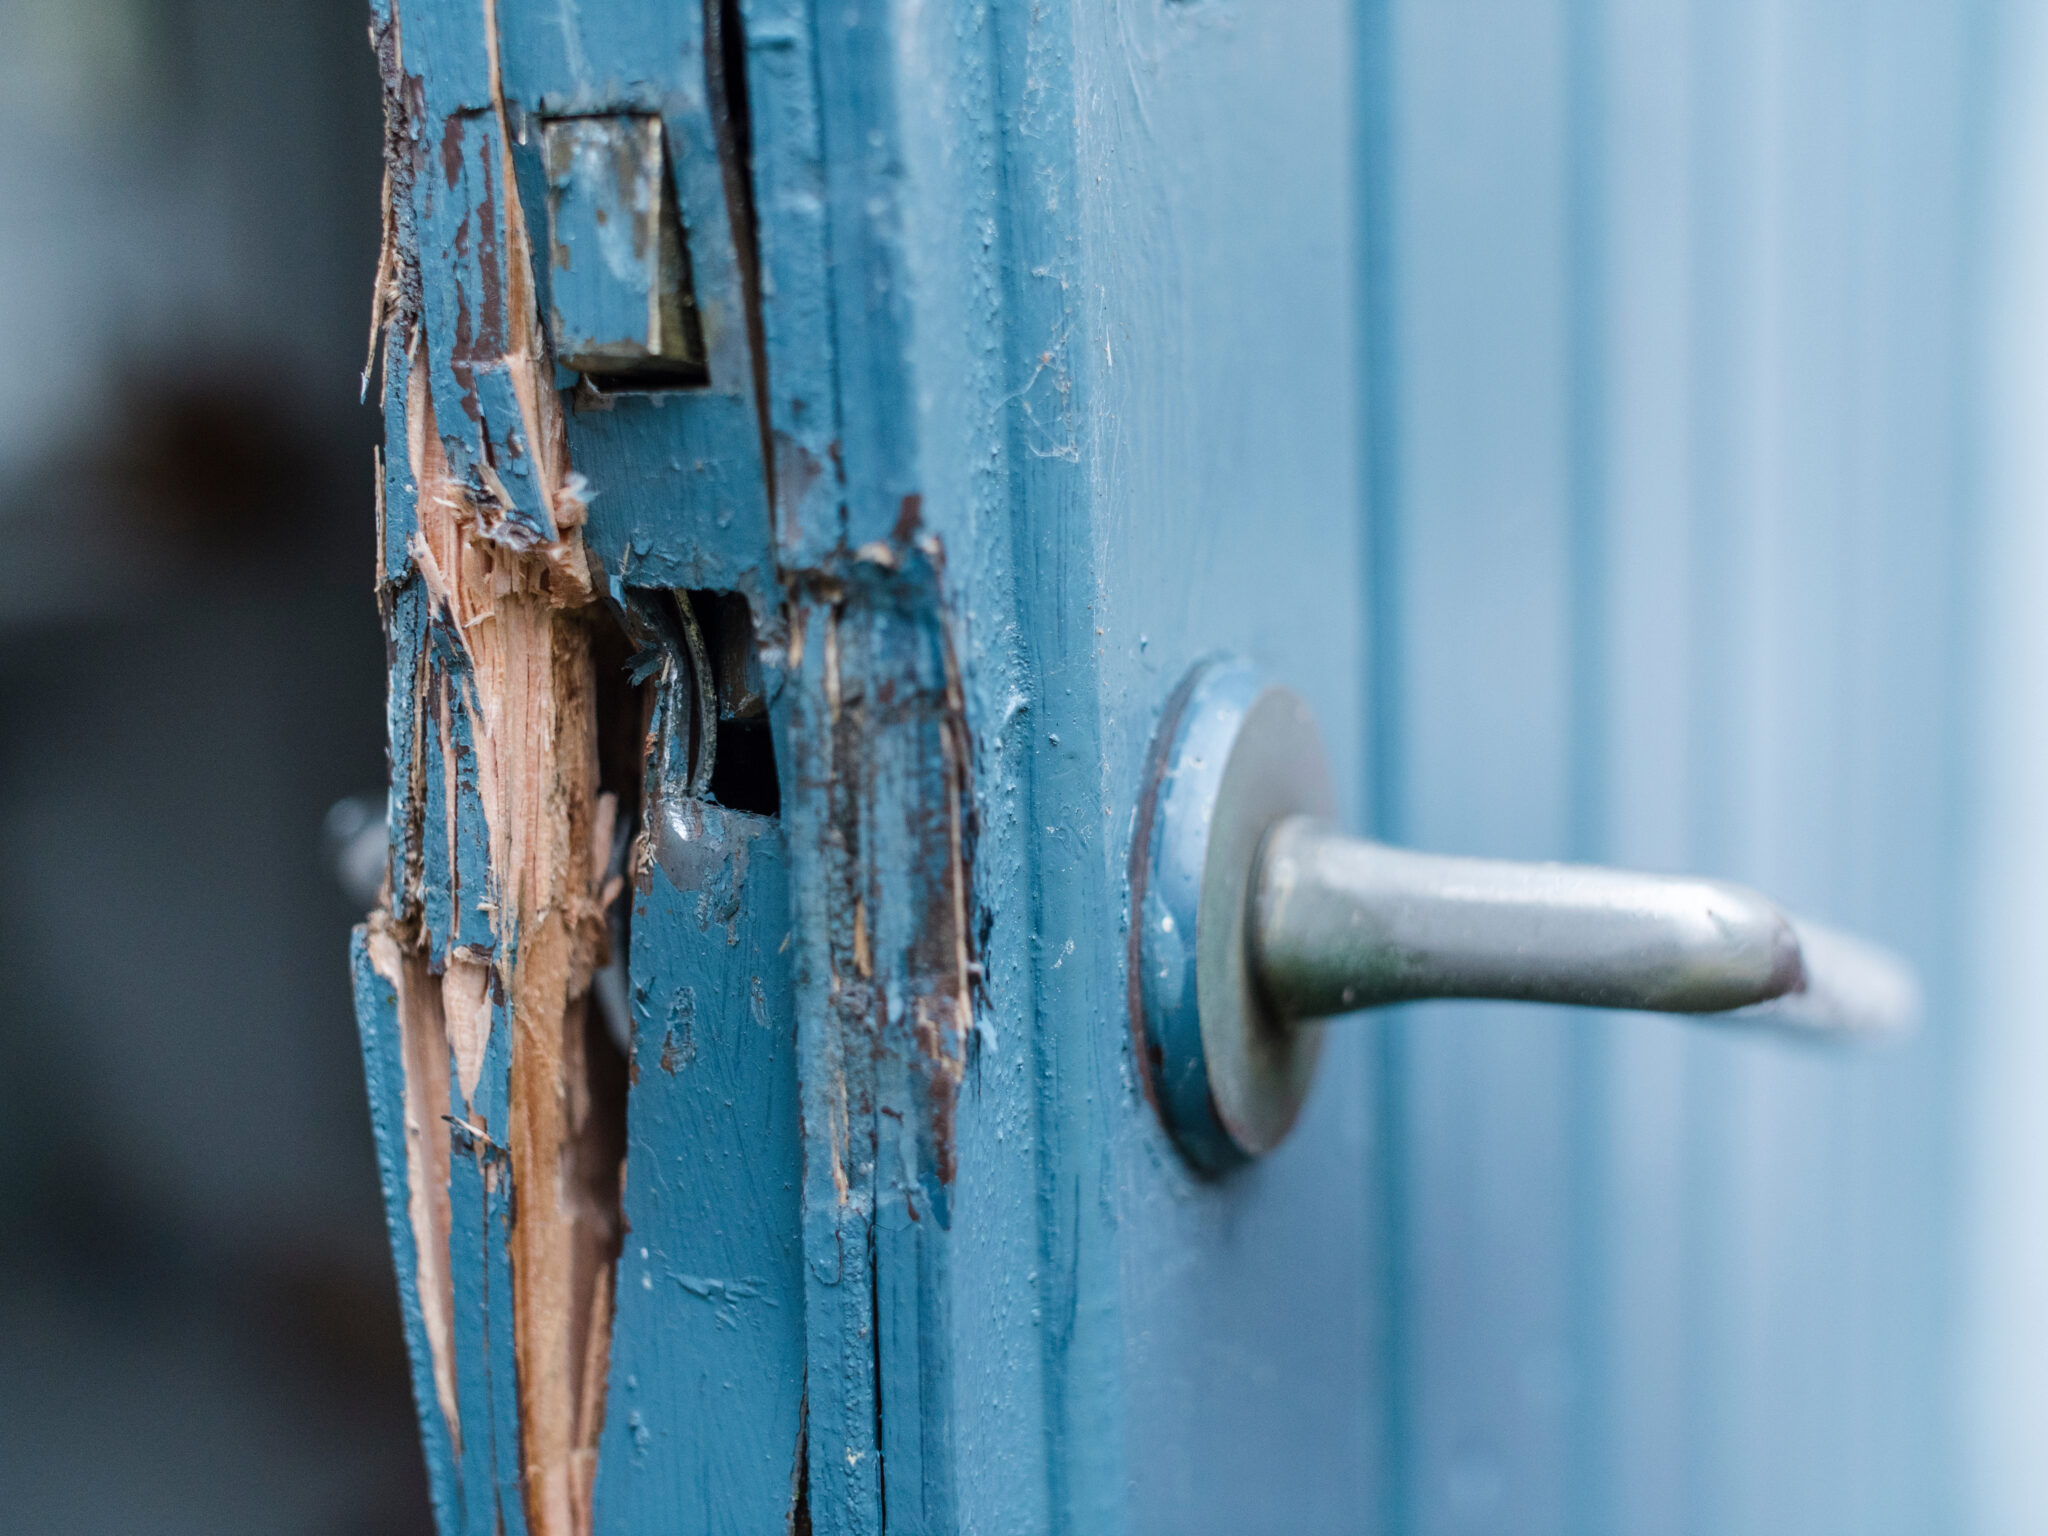 What Makes Locked Doors Vulnerable and How to Protect Your “Home Sweet Secure Home” 